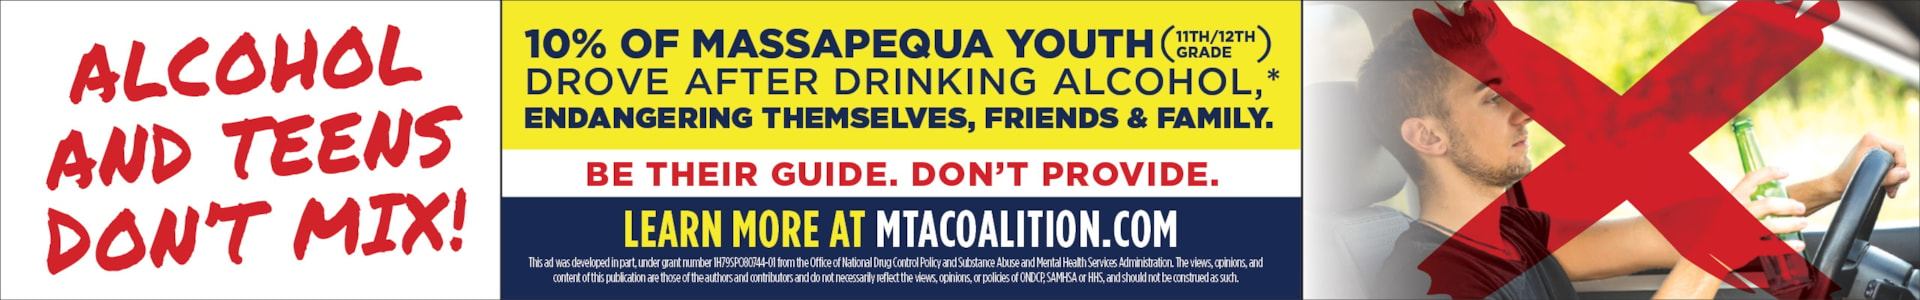 Massapequa Takes Action - Alcohol and The Law